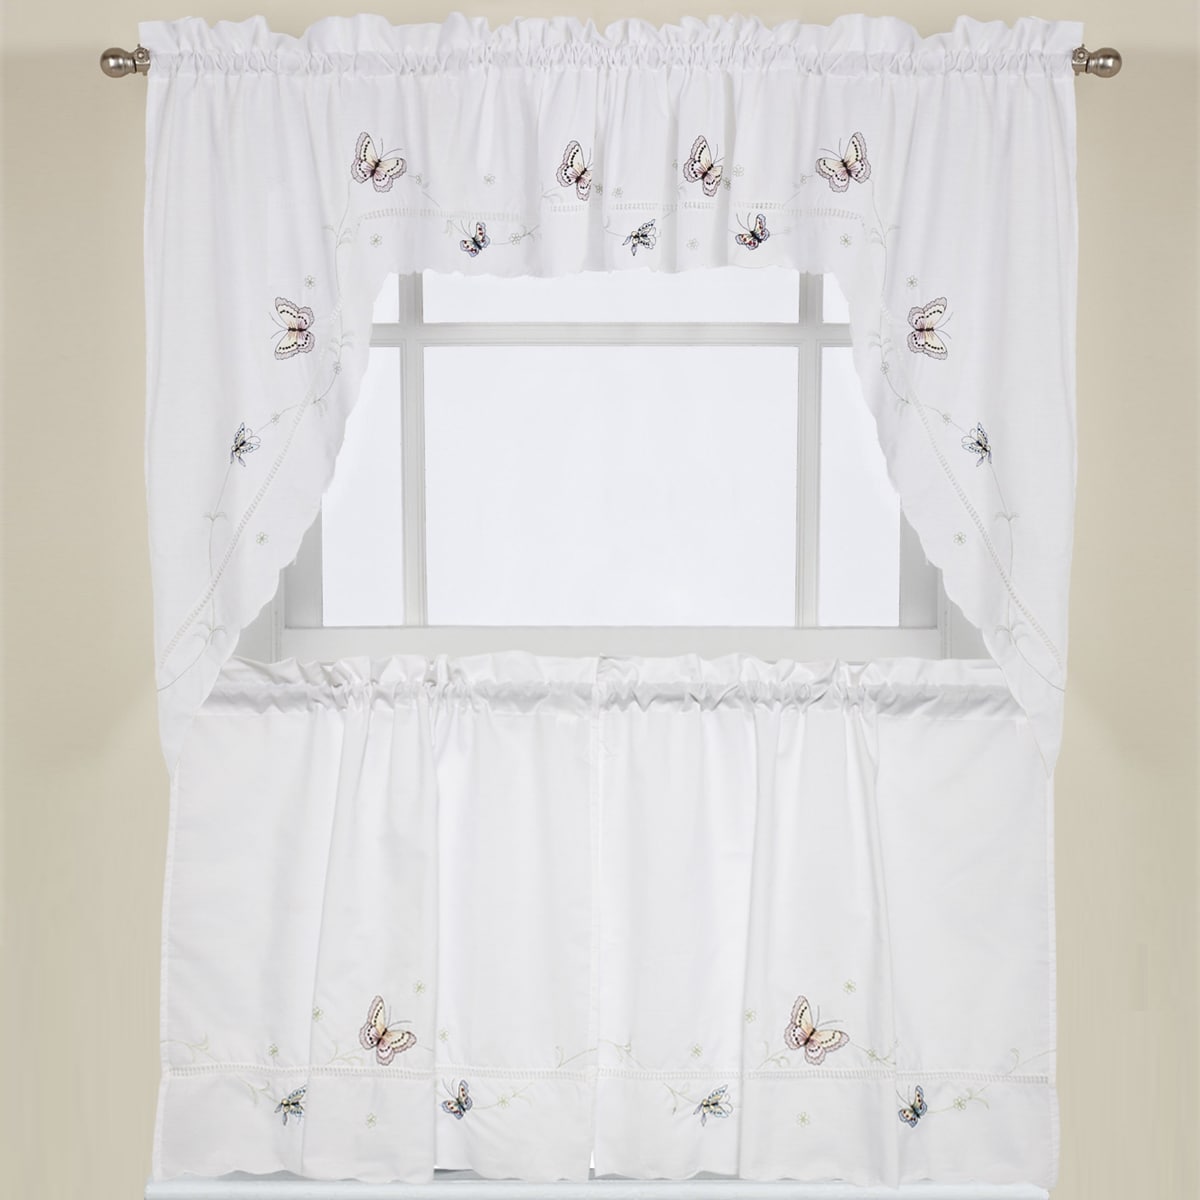 Embroidered Fluttering Butterfly Kitchen Curtains Tiers Swag Pairs And Valance 3ff34c86 F34d 457b 87a7 19a8e23ad14f 